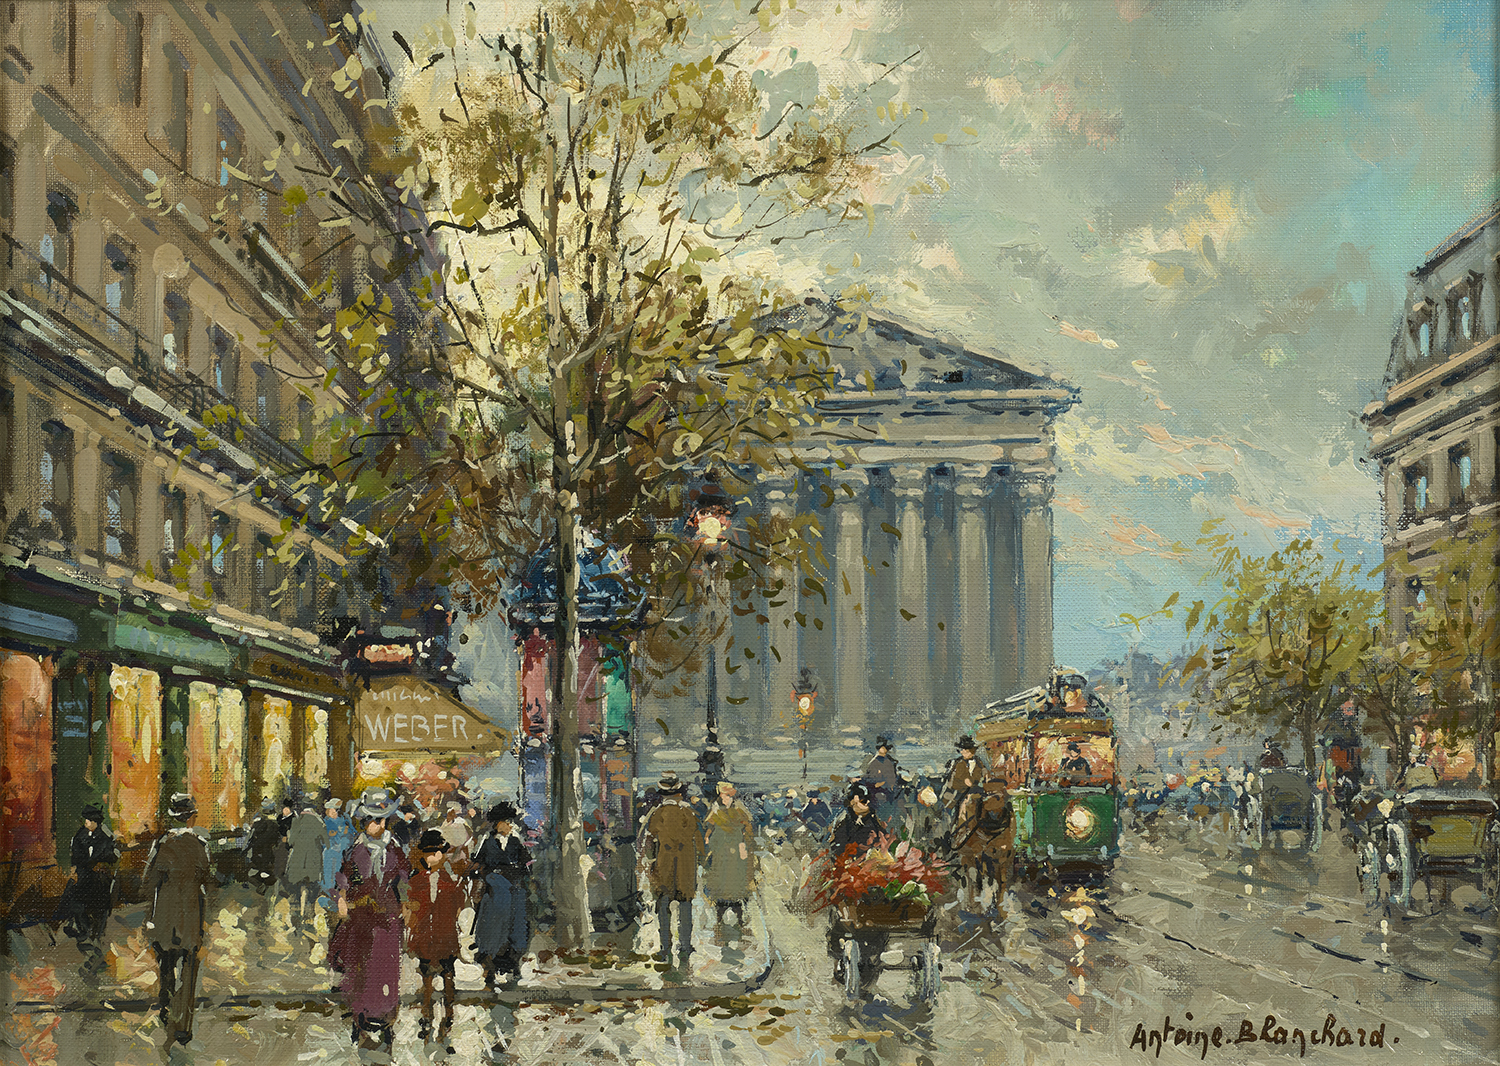 painting by antoine blanchard of the madeleine from rue royale in paris